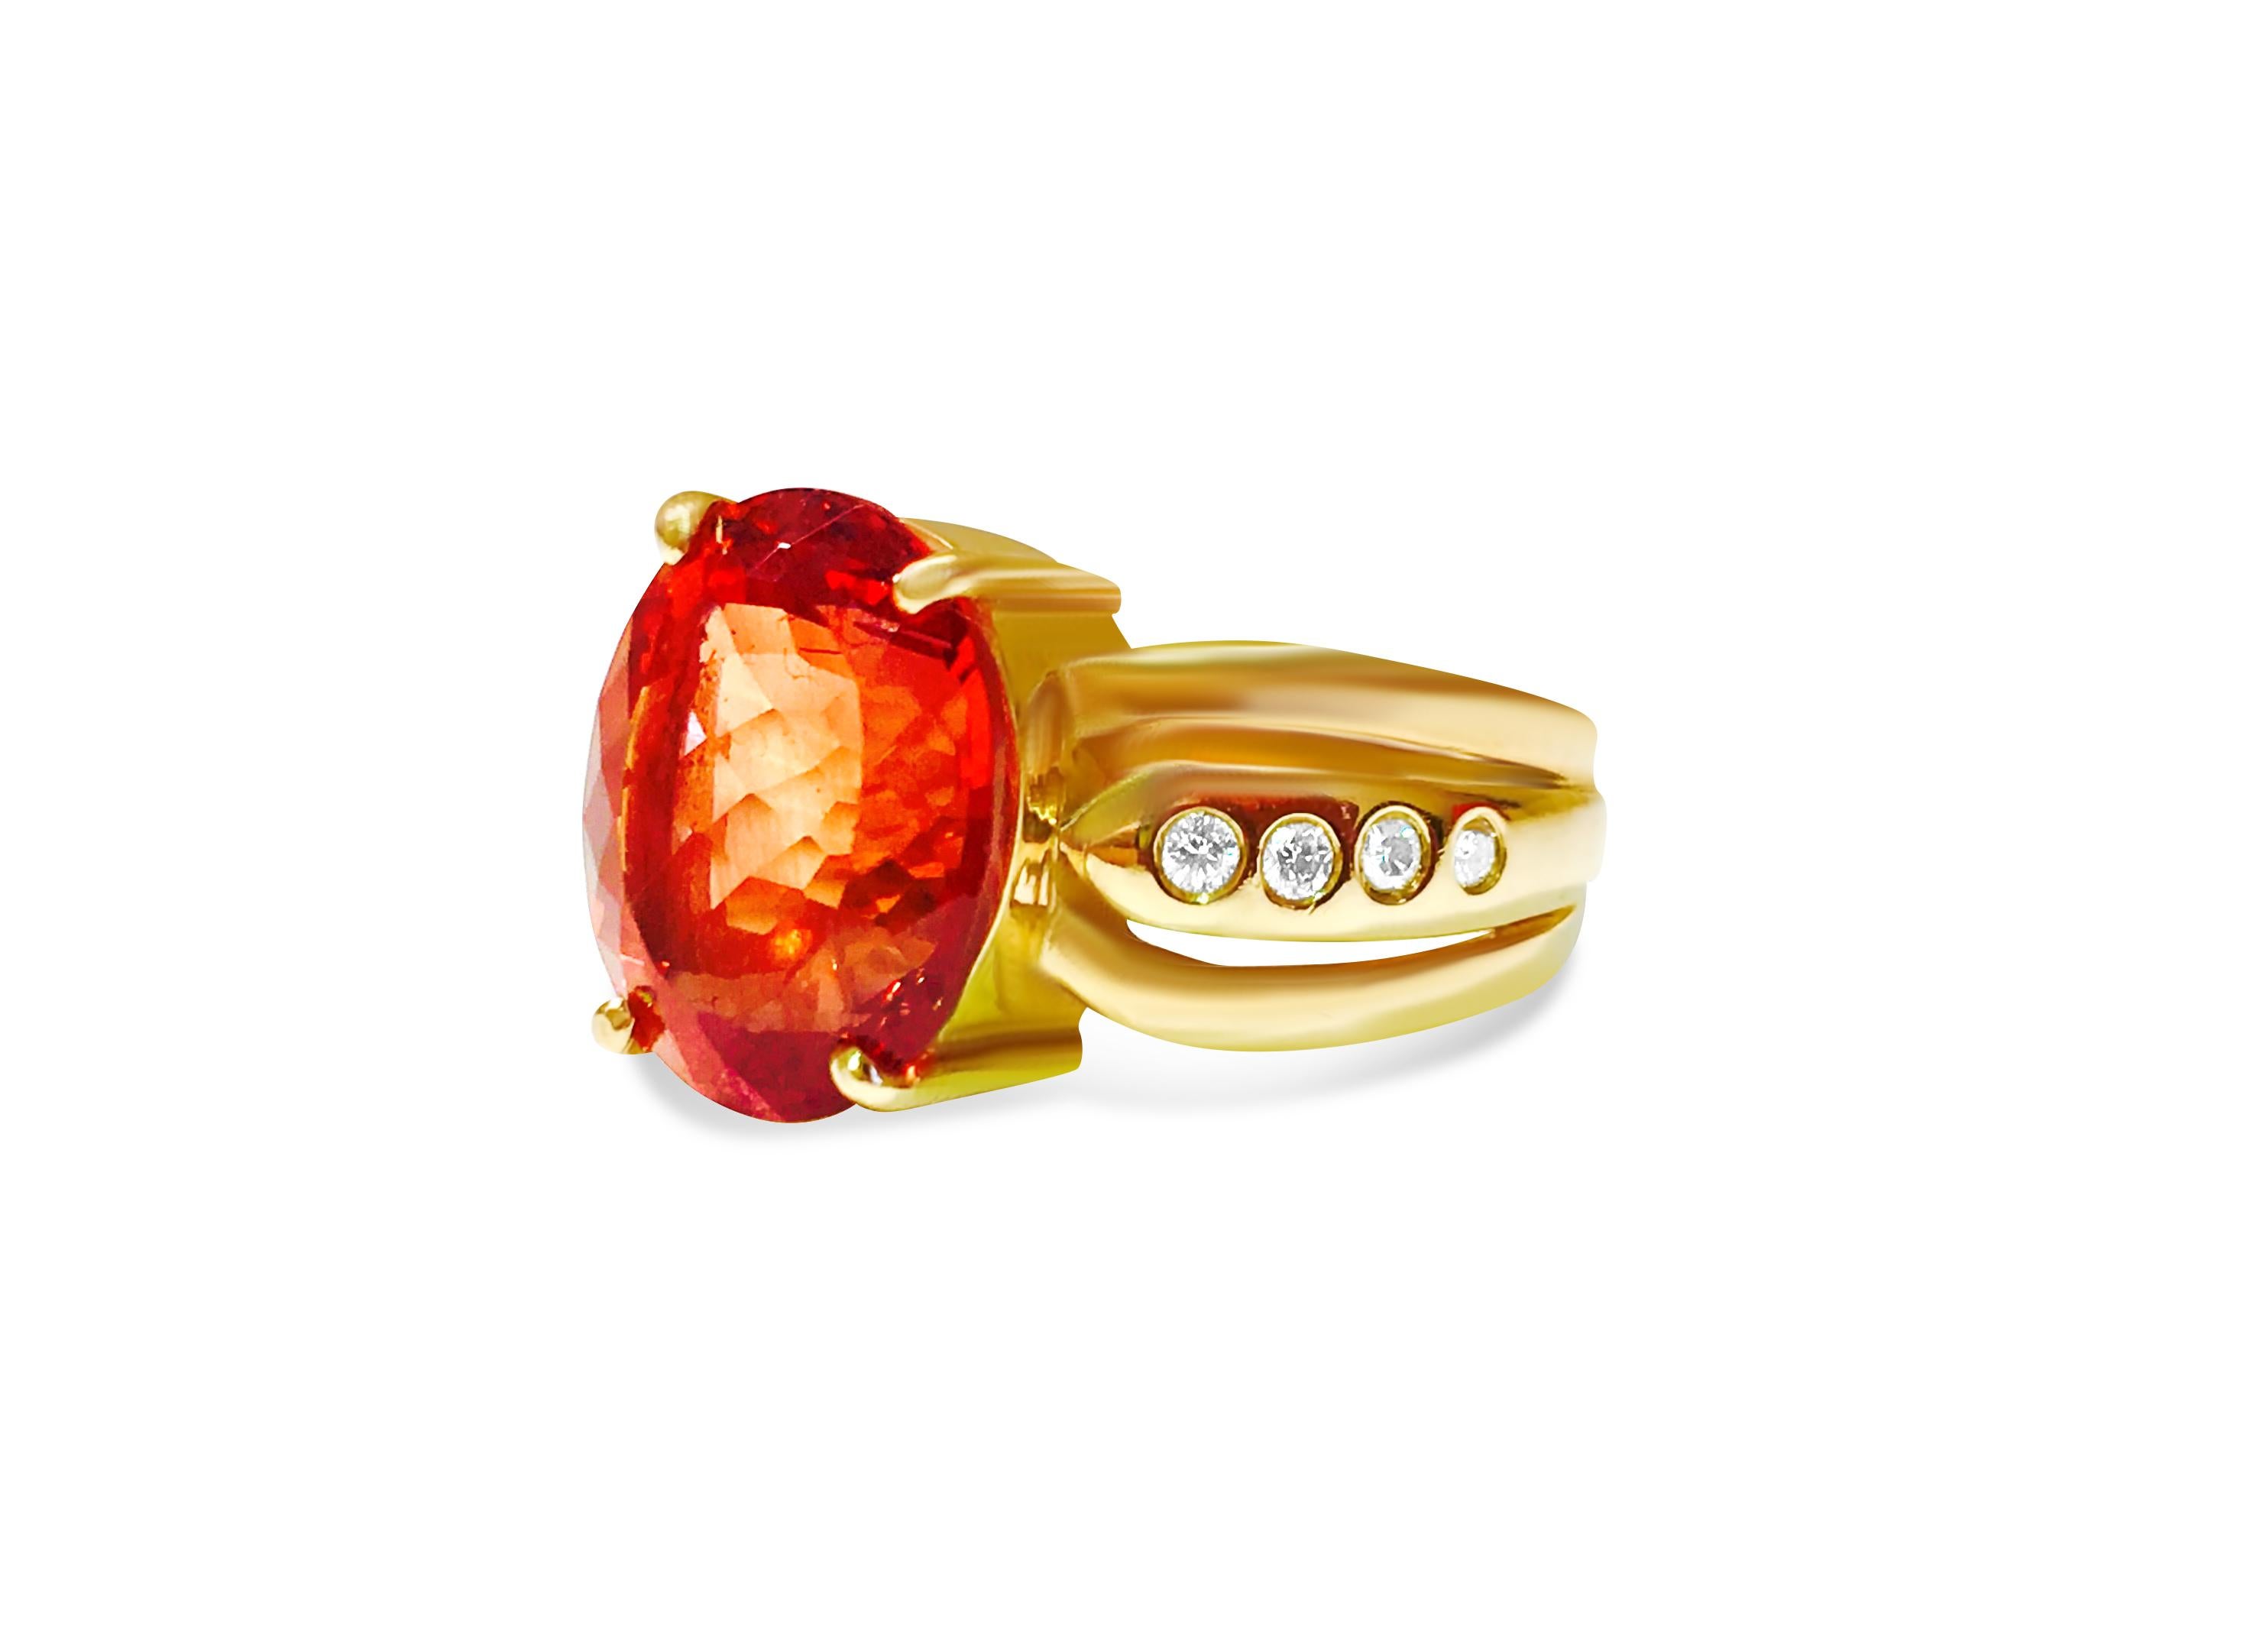 Metal: 14k Yellow Gold. 

Center: 5.00 Carat orange beryl. Oval cut, set in prongs. 100% natural earth mined gemstone.

Side diamonds: 0.32 cwt. G color and VS-SI clarity. Round brilliant cut diamonds set in flush setting. 100% natural earth mined